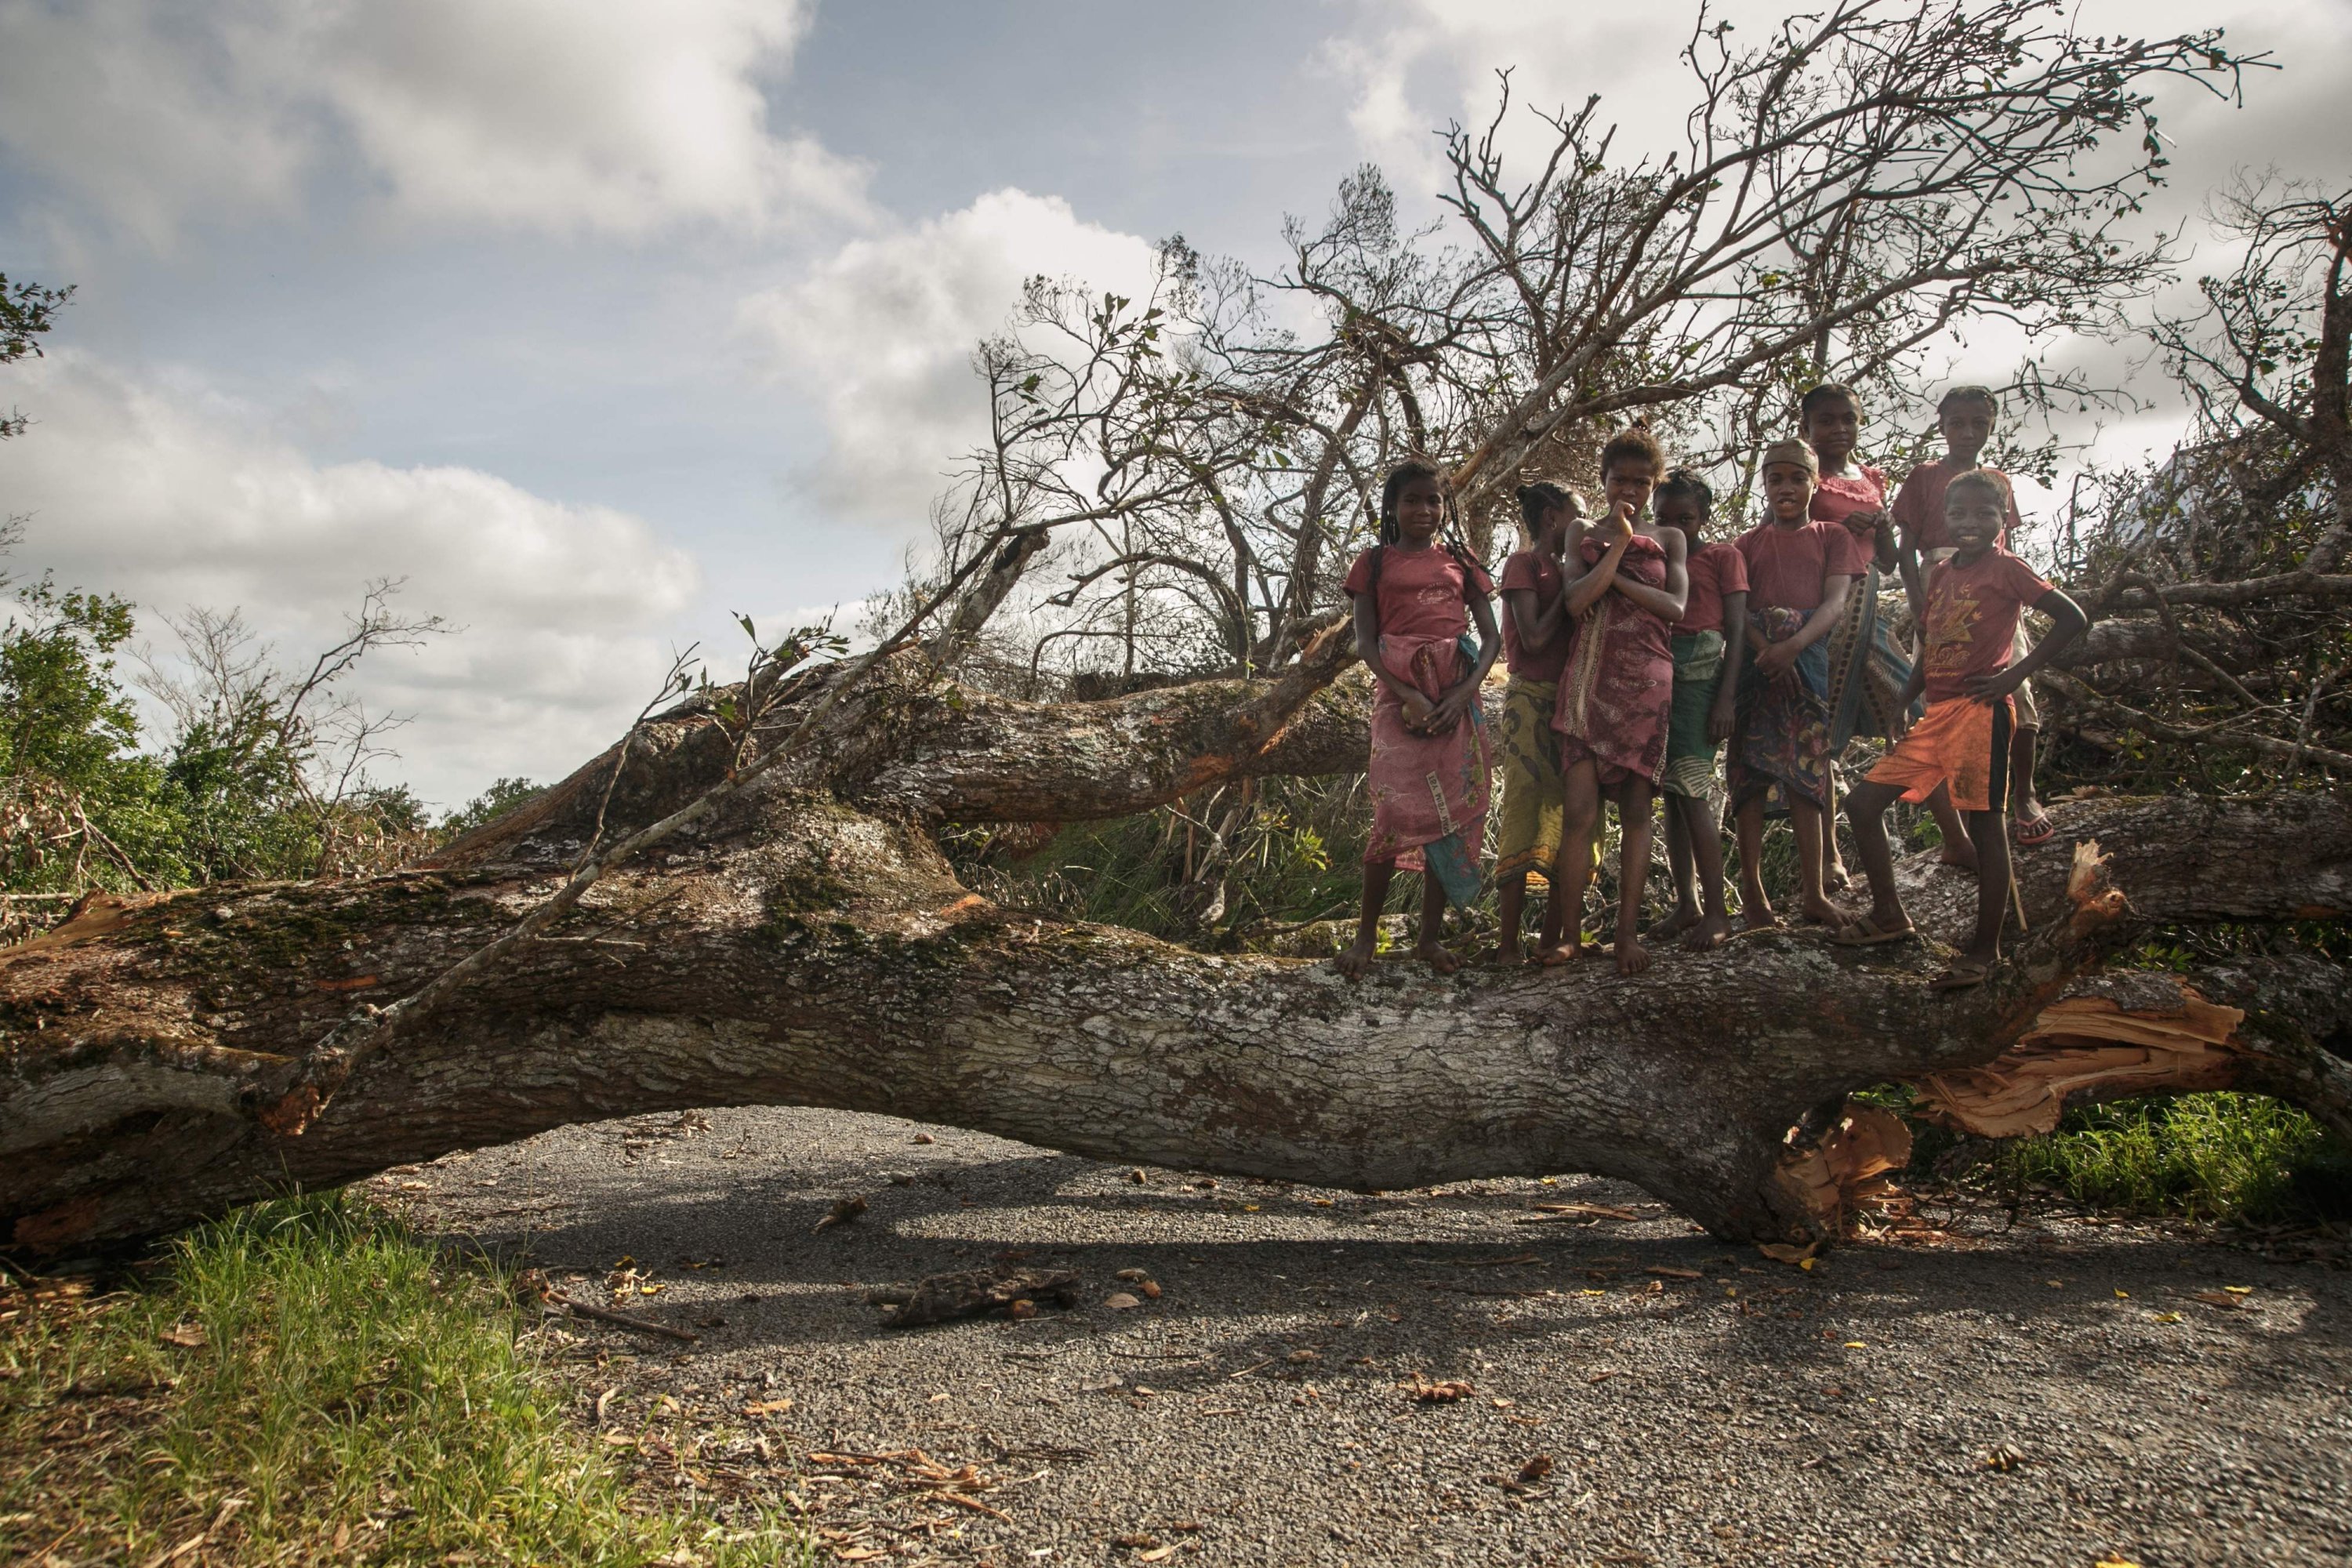 Children play on fallen trees following the passage of cyclone Batsirai that completely obstructed the RN25 leading to Mananjary, Madagascar, Feb. 8, 2022. (AFP Photo)